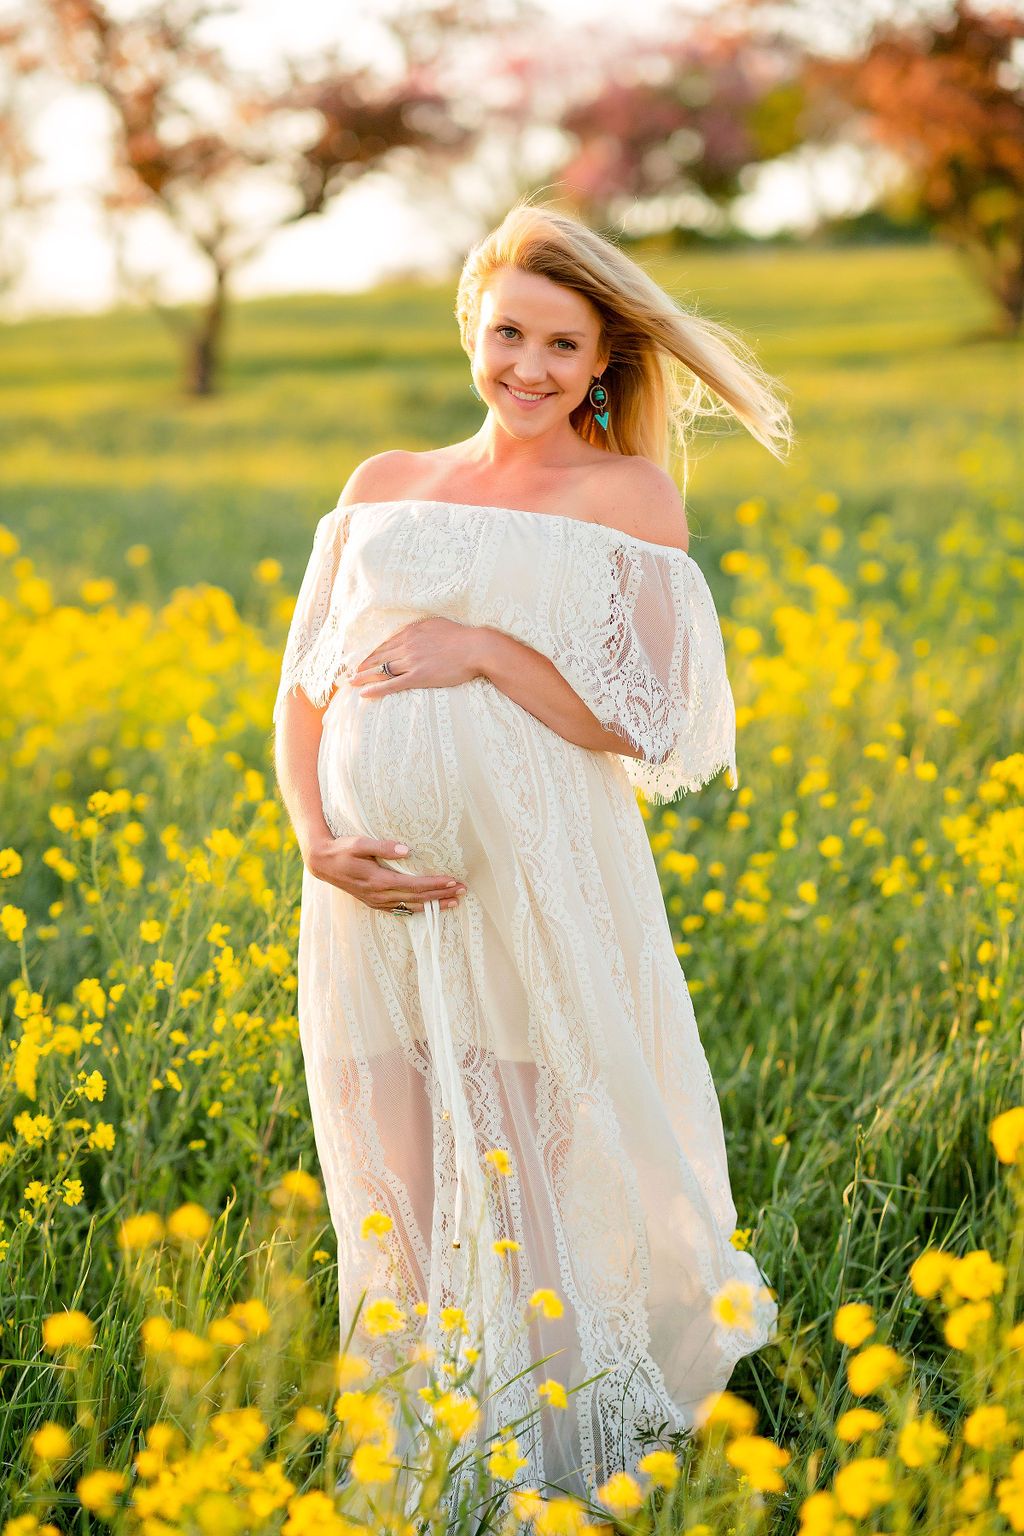 A mom to be in a lace maternity dress stands in a field of yellow wildflowers while holding her bump